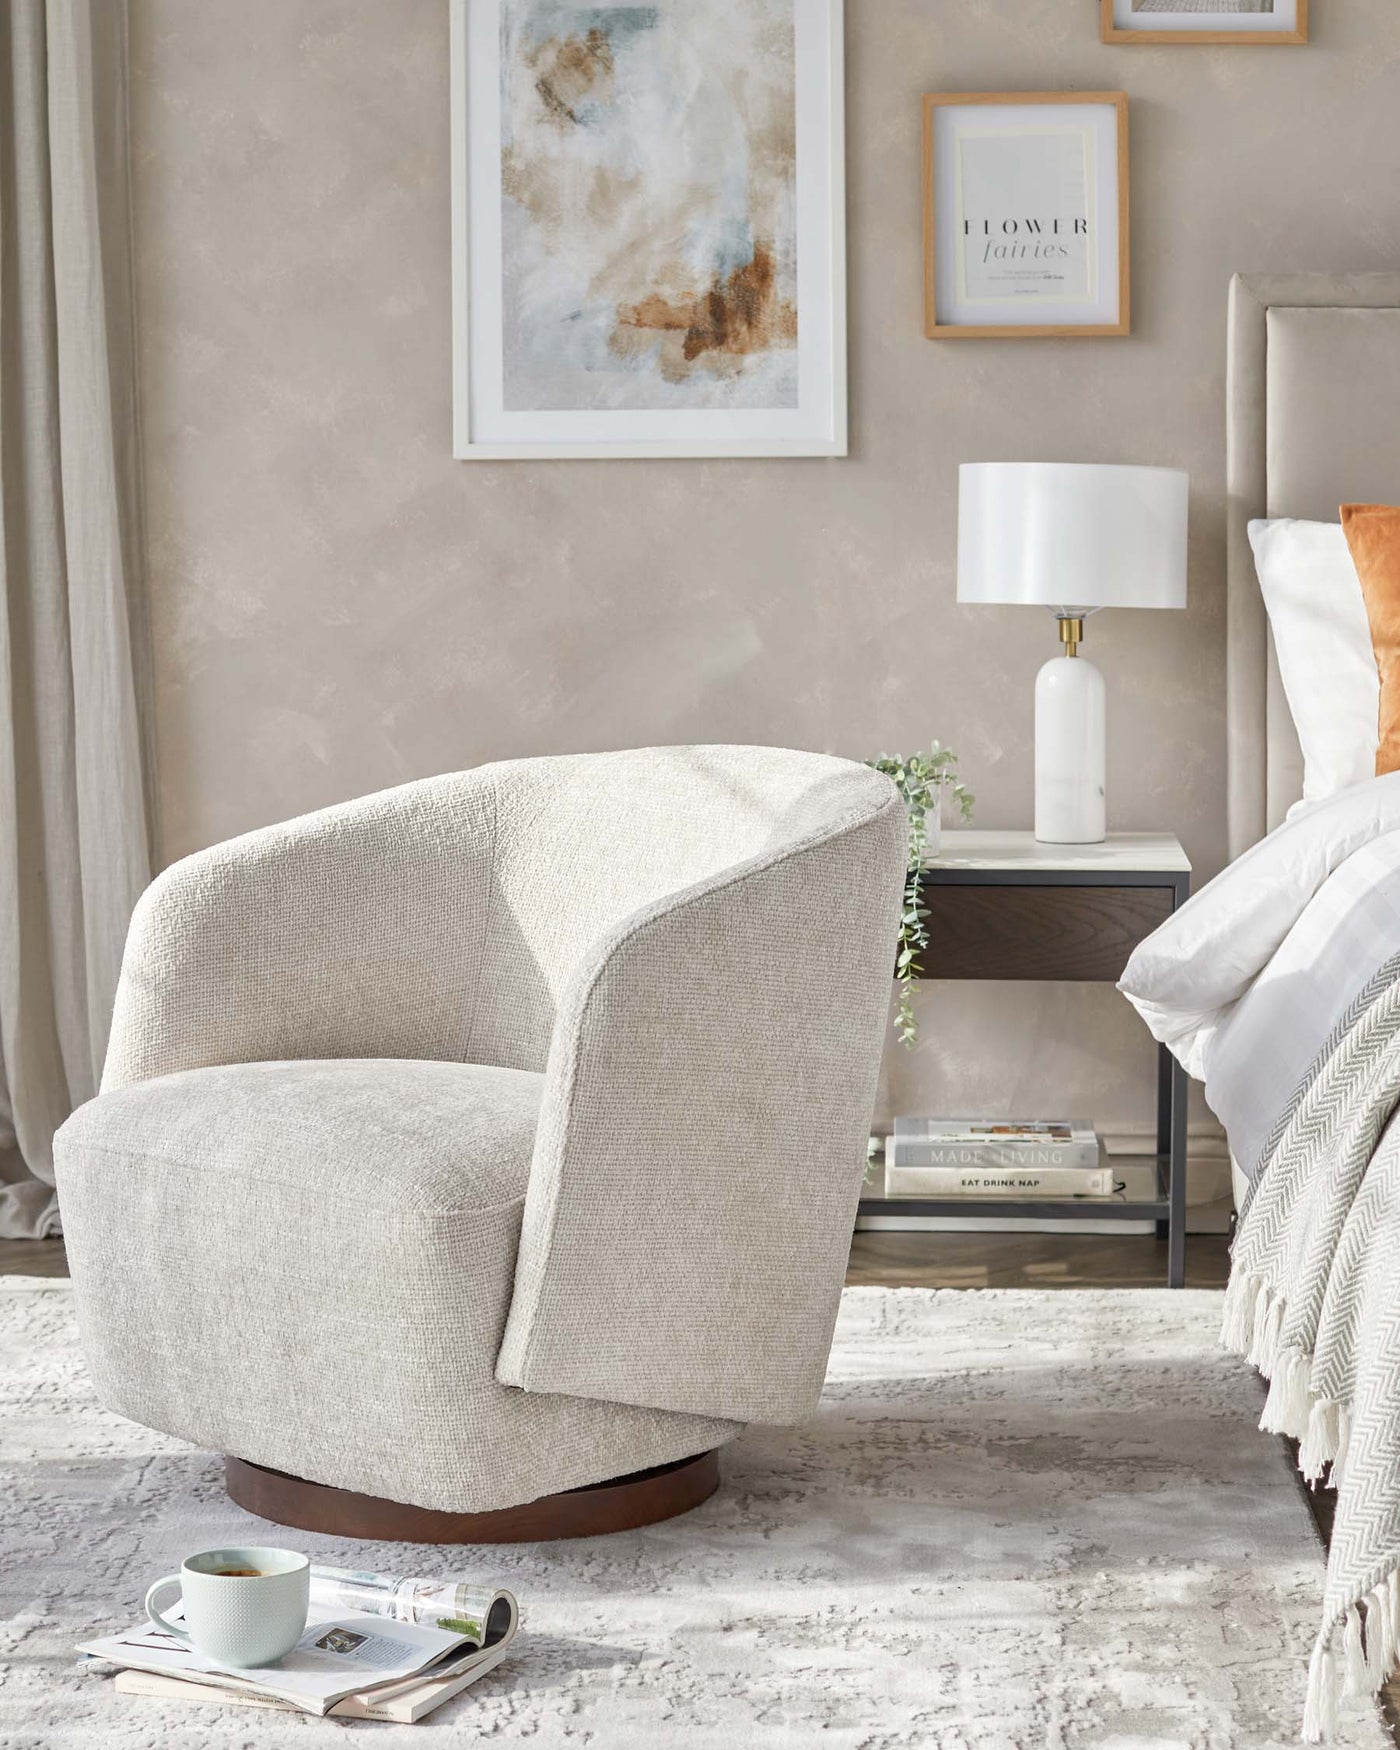 Modern stylish armchair with textured light beige upholstery and a unique curved design set on a dark wood base, beside a sleek white side table featuring a fashionable marble effect and metallic details, both adorned with minimalistic decor items and complementing the contemporary and cosy bedroom setup.